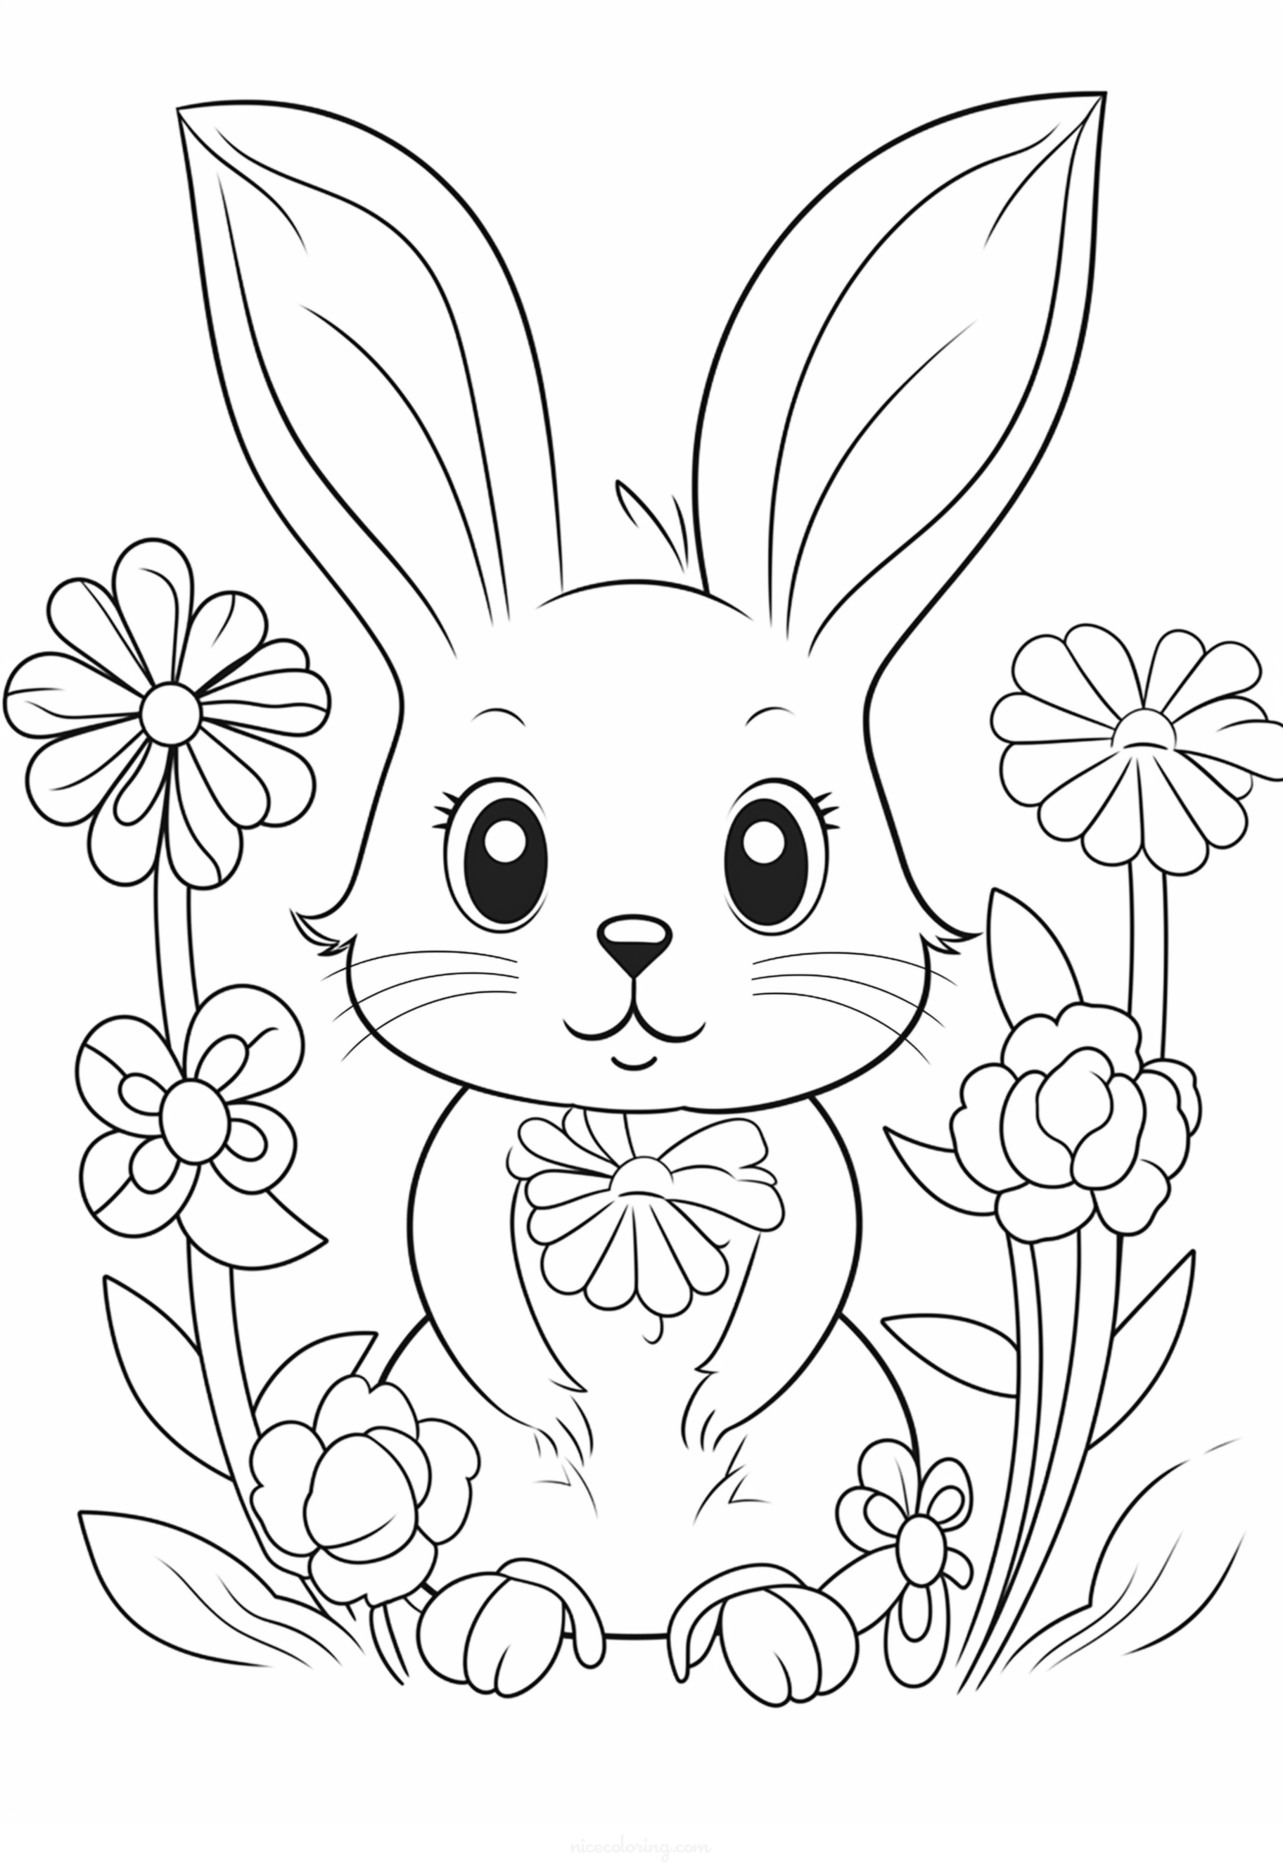 Rabbit surrounded by flowers coloring page